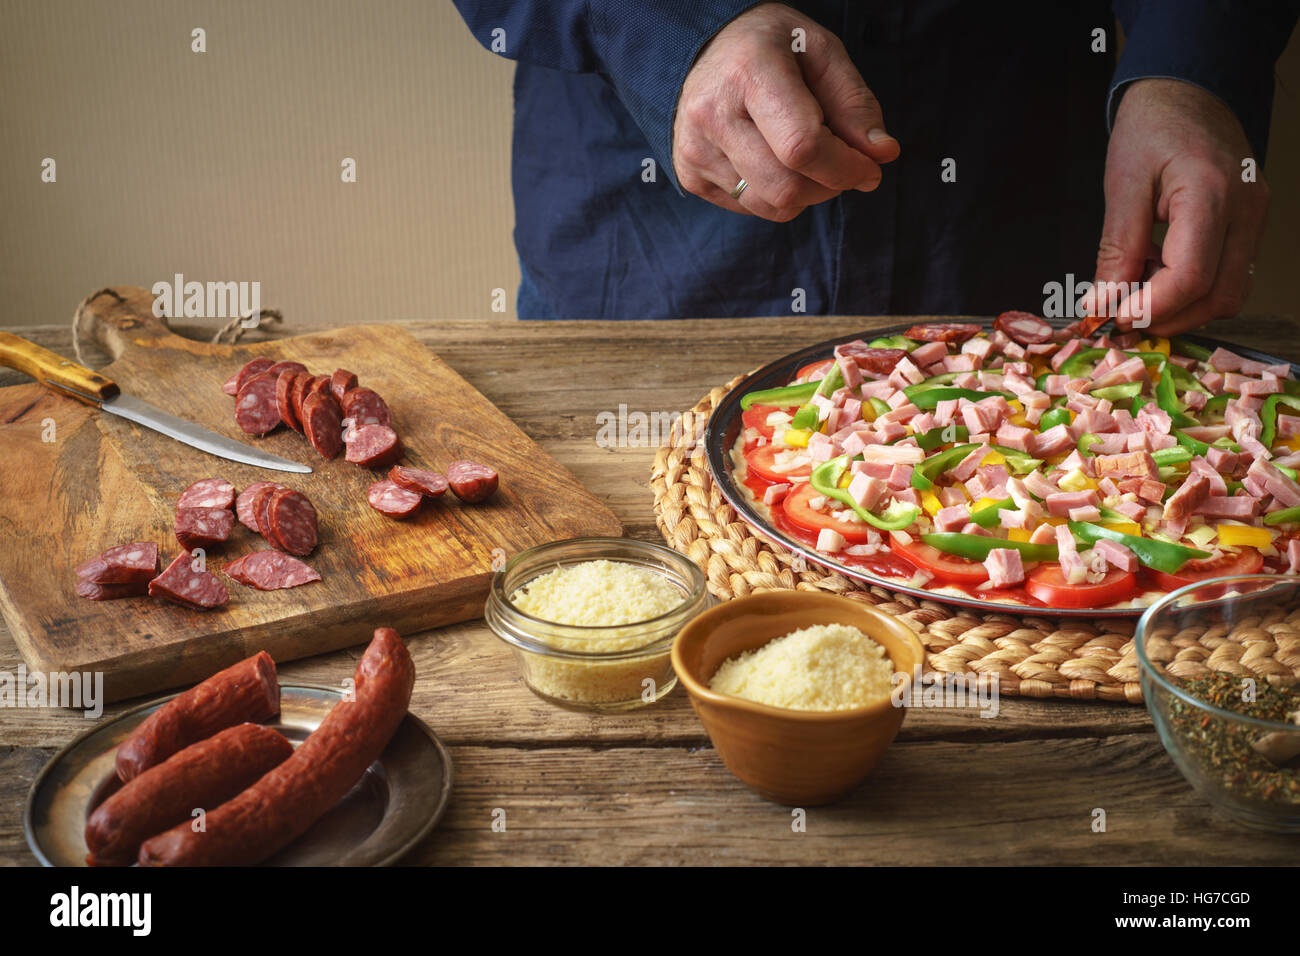 Man in a blue shirt makes homemade pizza in the kitchen horizontal Stock Photo